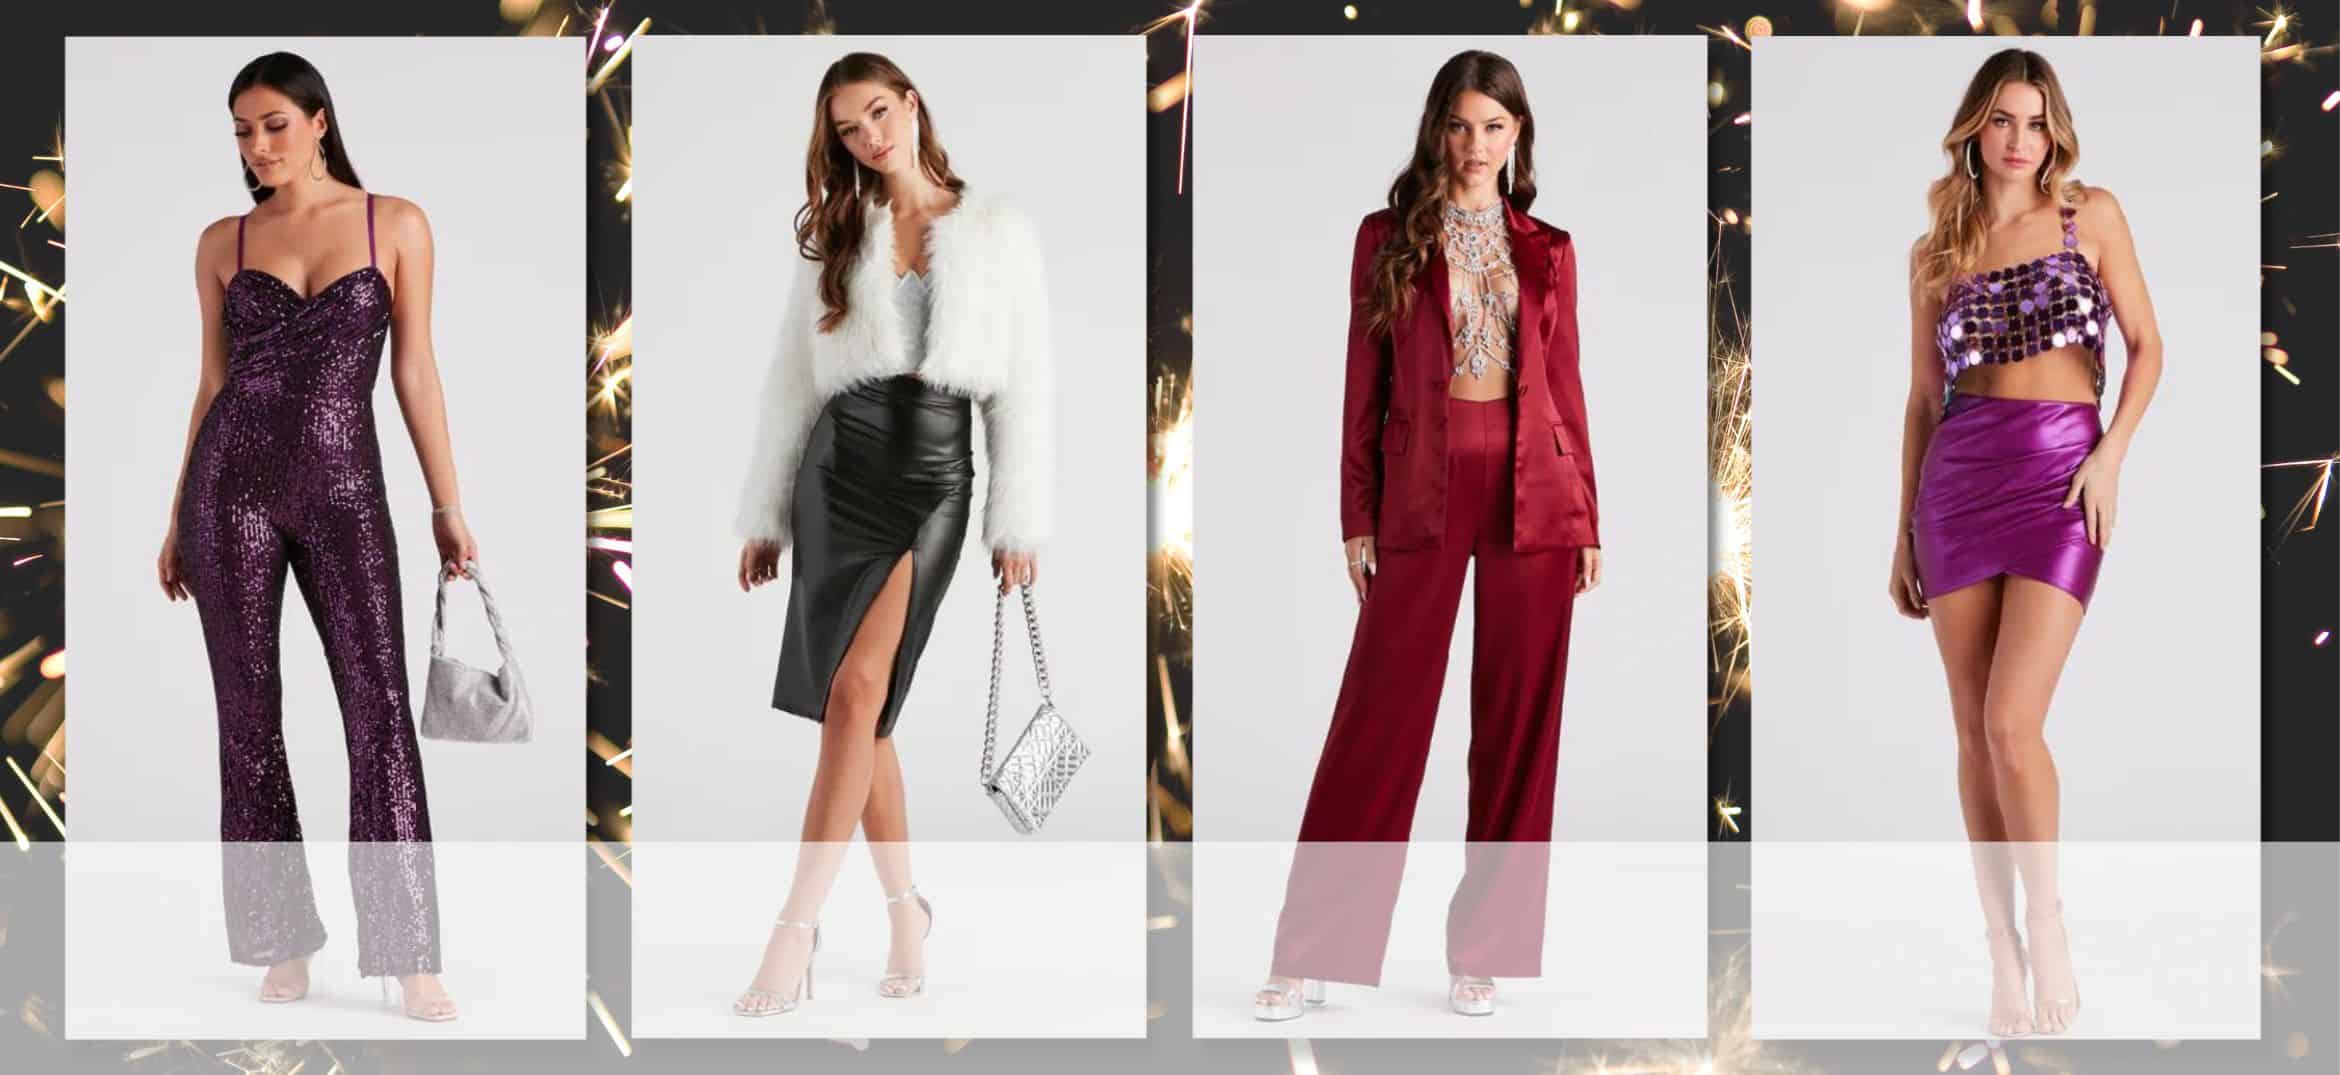 New Years Eve 2023 Outfits - Get Latest Outfits For 2023 Update